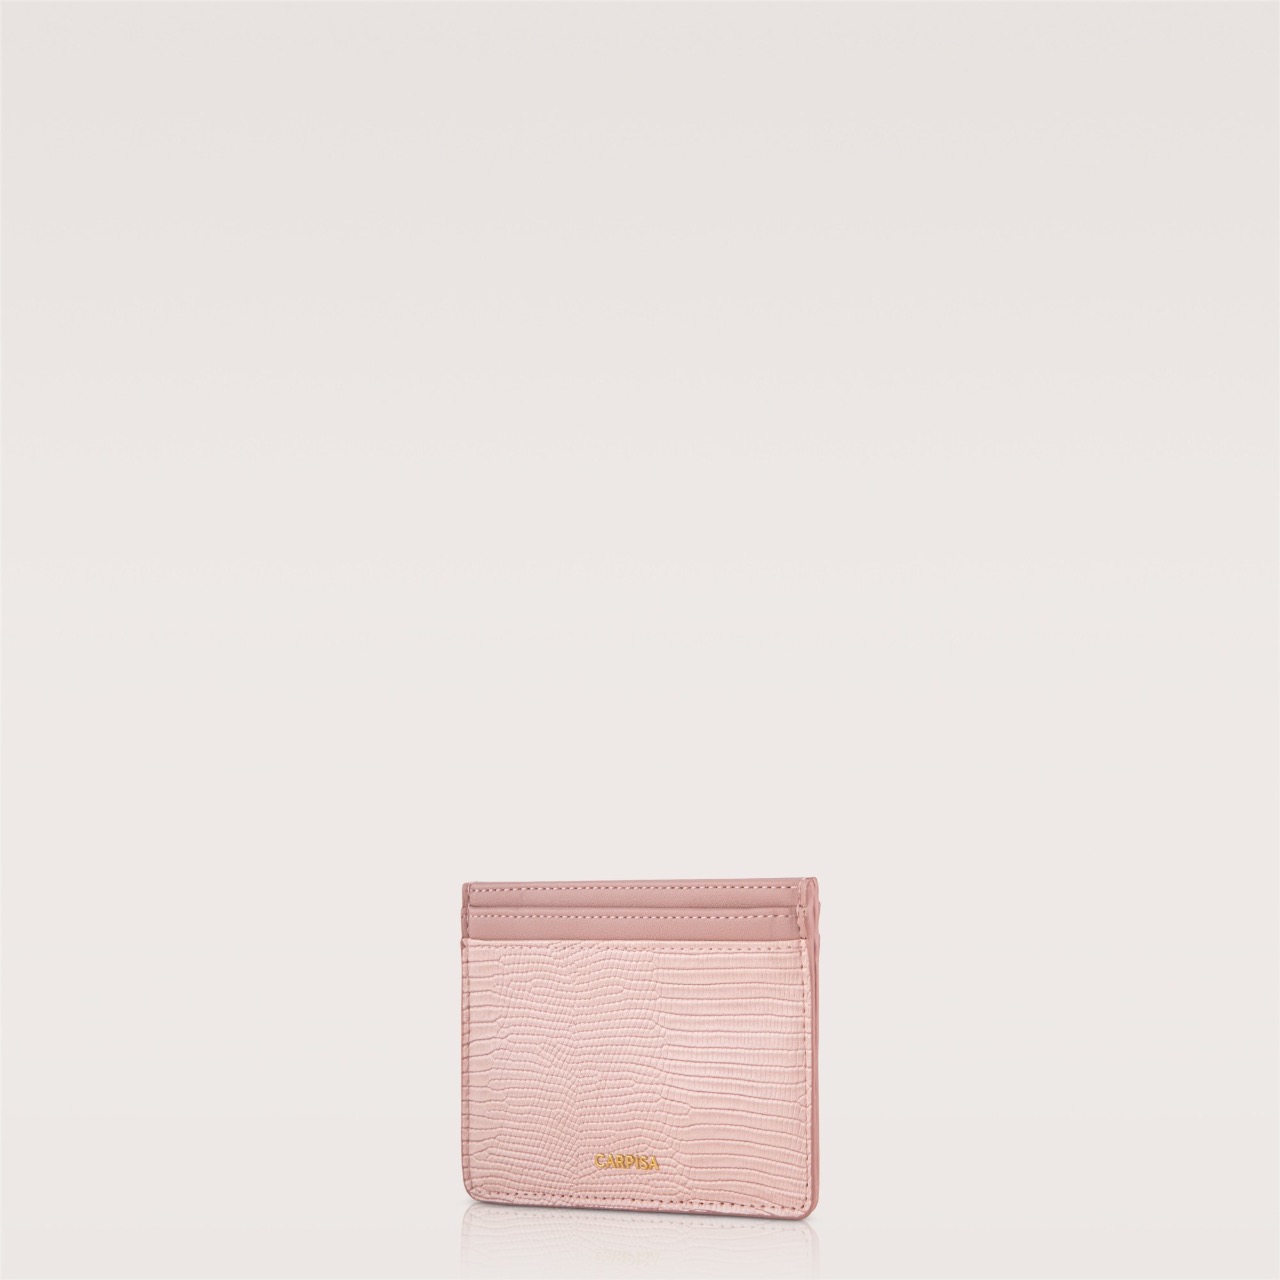 Small-sized credit cardholder - Adriel priced at 1499